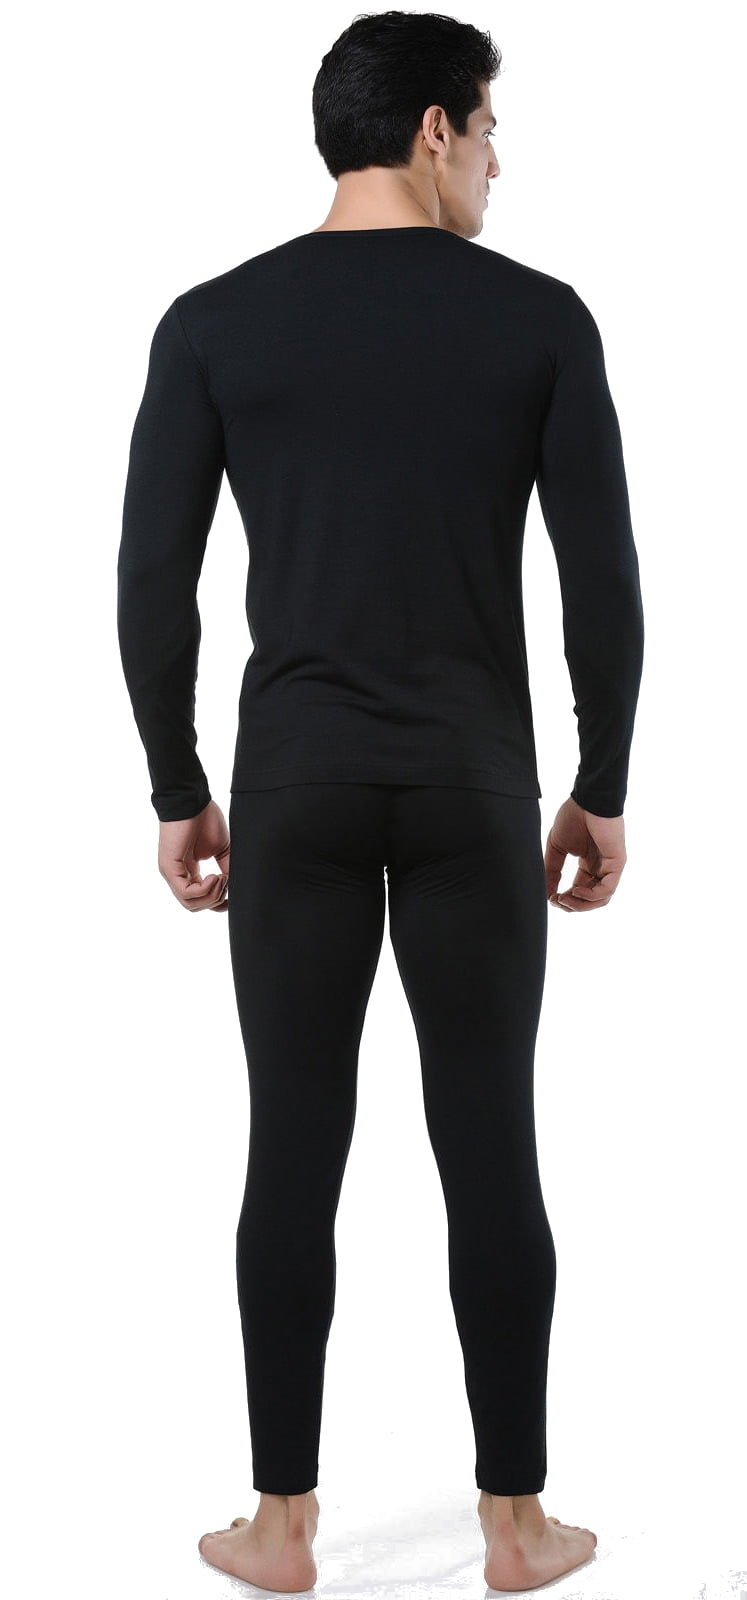 Mens Thermal Underwear Set Soft Fleece Lined Sport Top and Pants Base Layer Set 